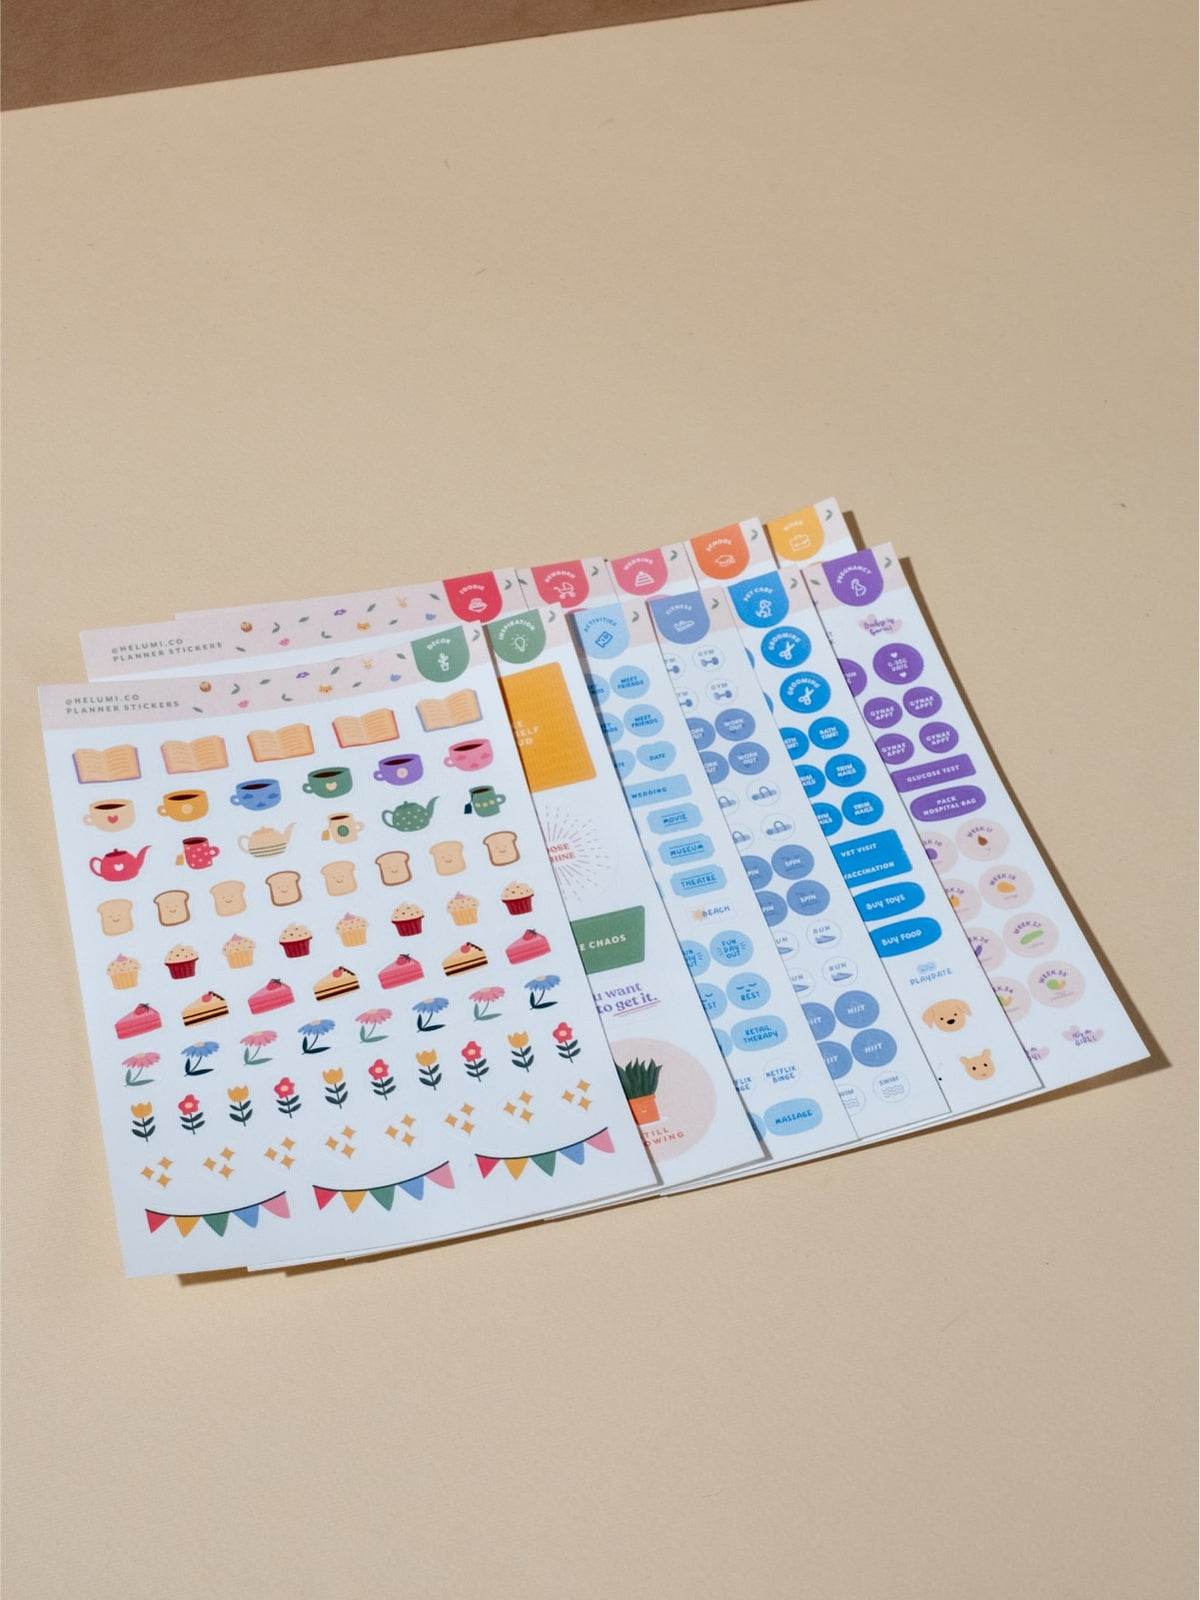 Activities V2 - Colour-coded Planner Sticker Sheet